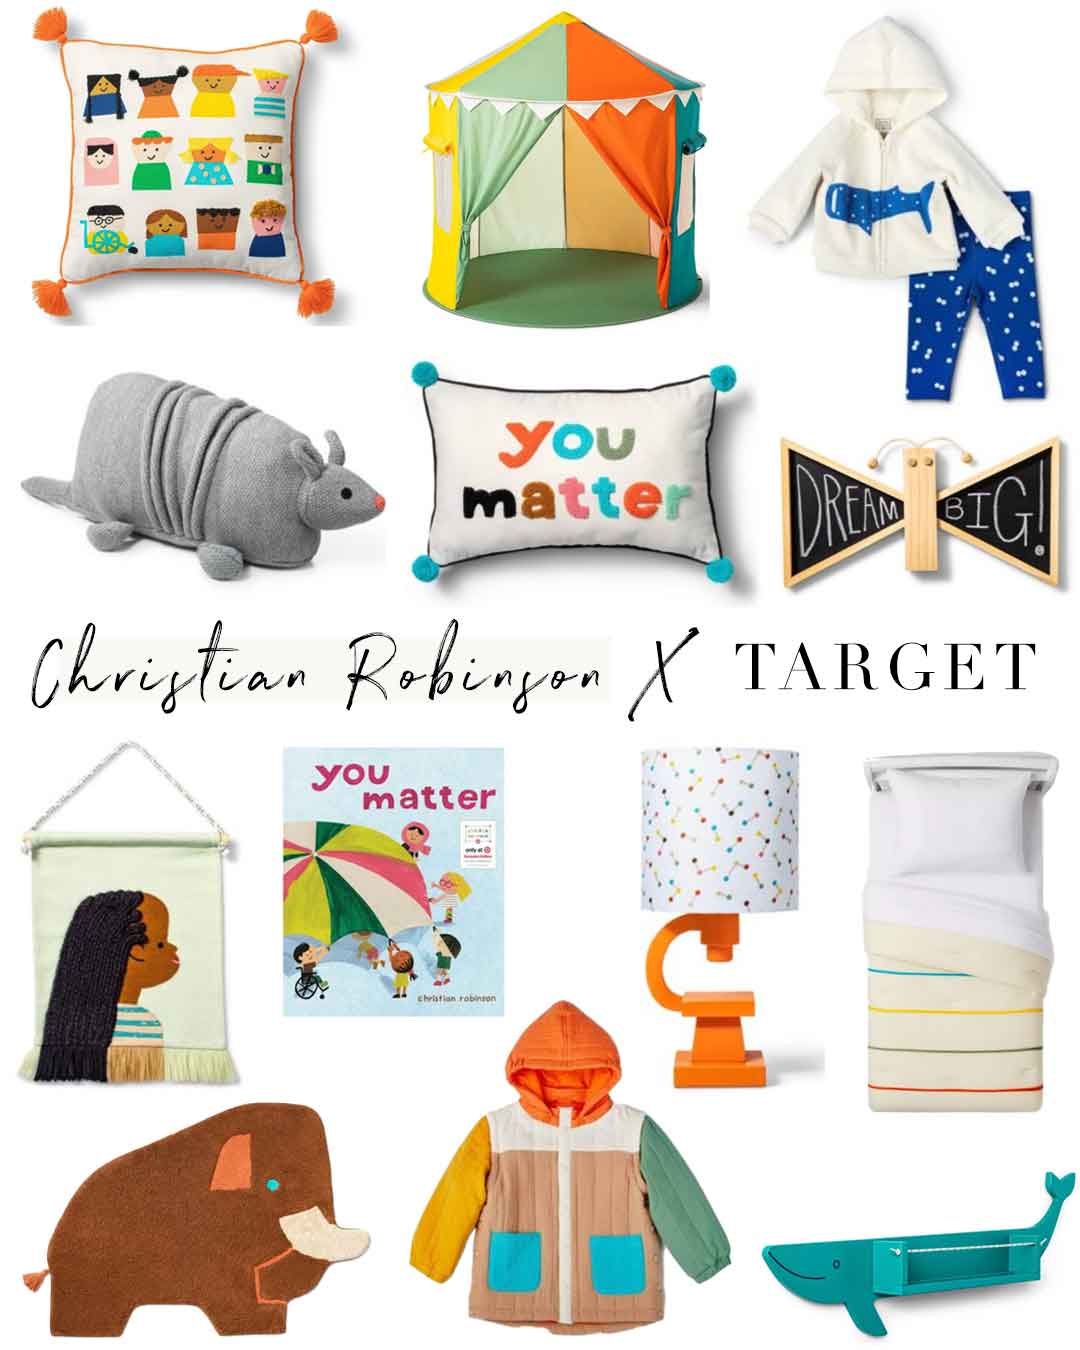 Christian Robinson x Target coming August 15th!